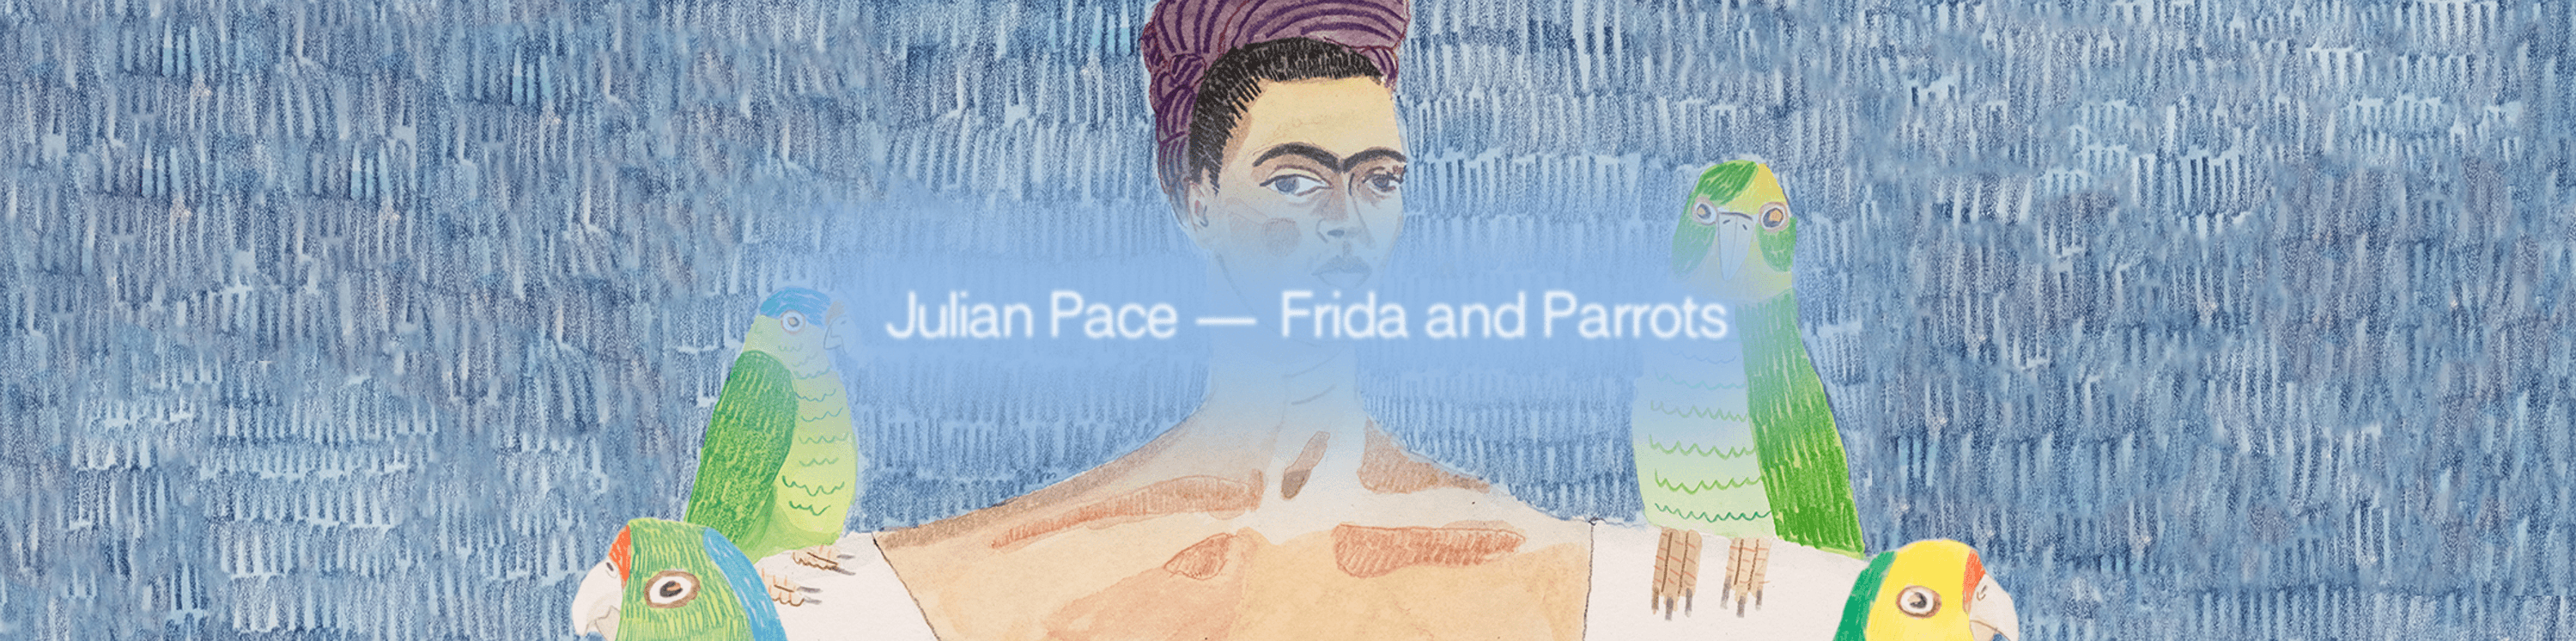 Julian Pace - Frida and Parrots